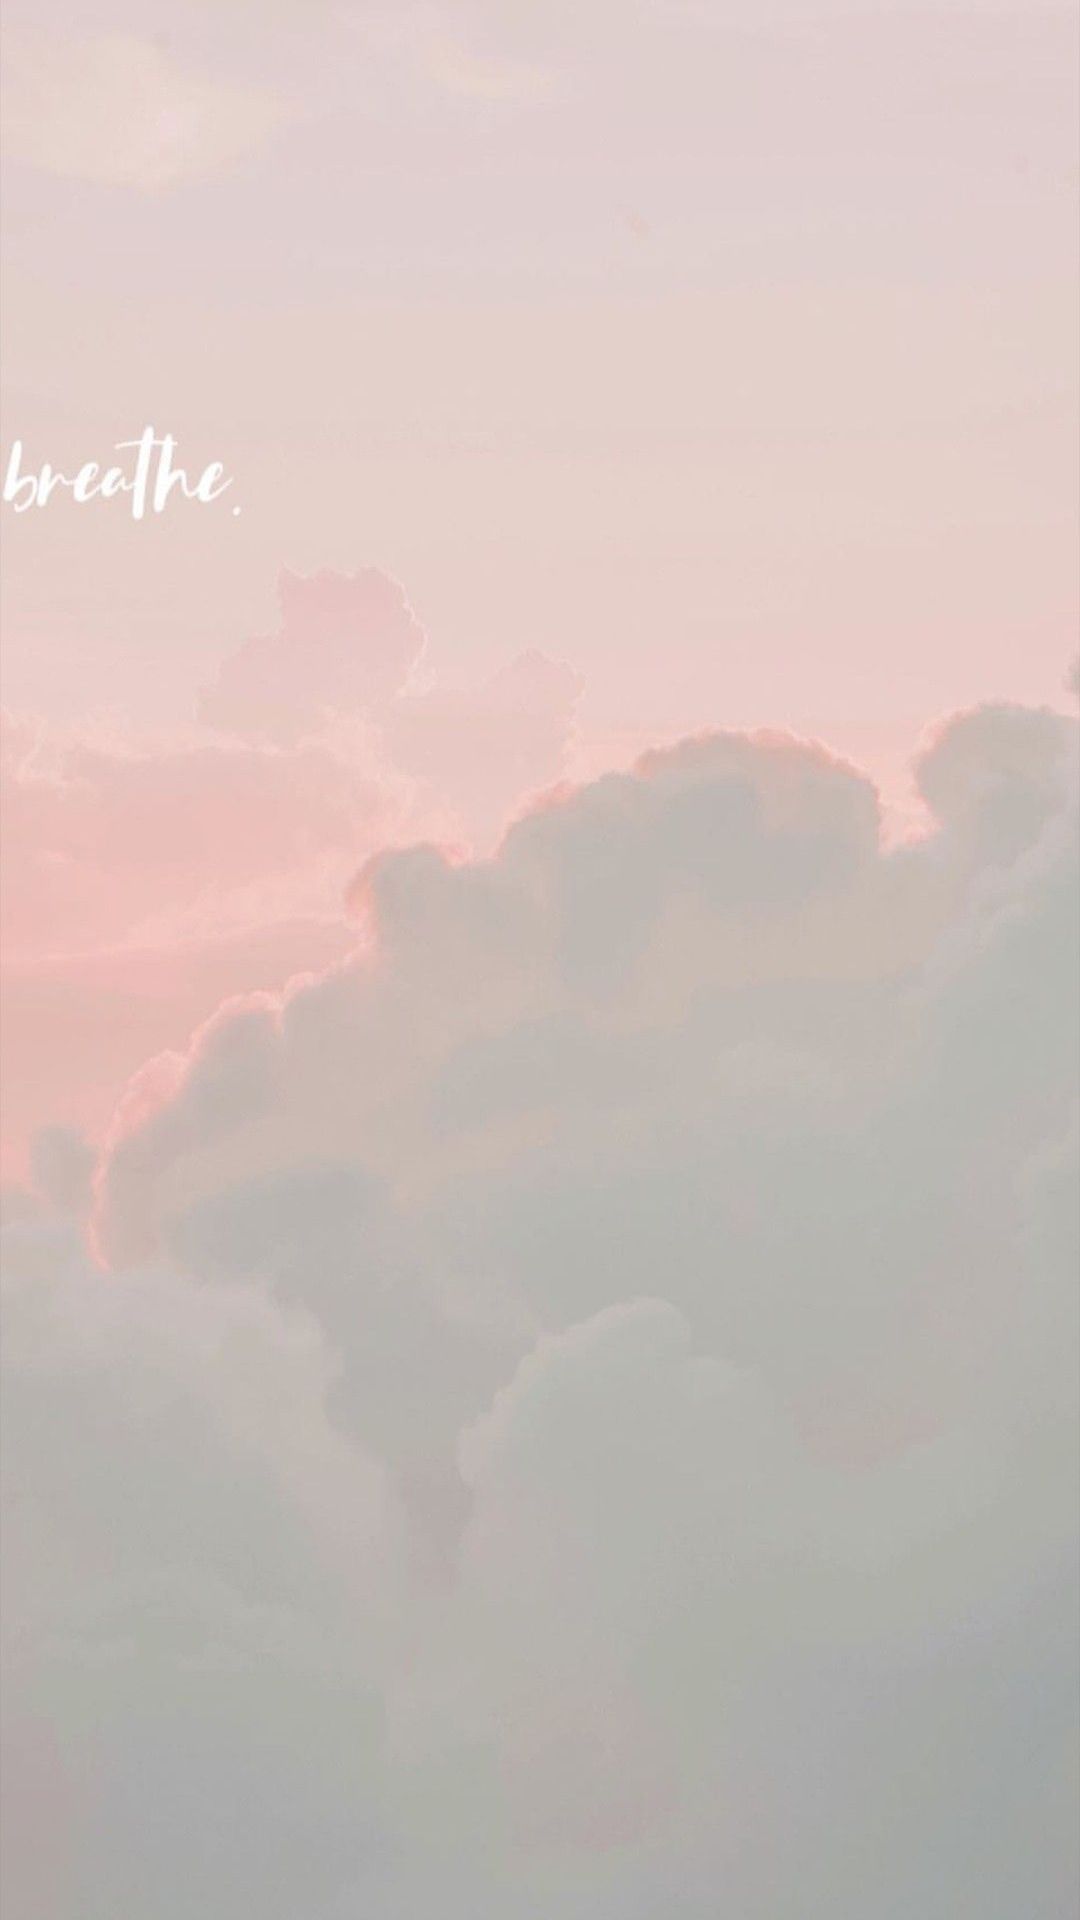 Live Aesthetic Wallpaper Free download